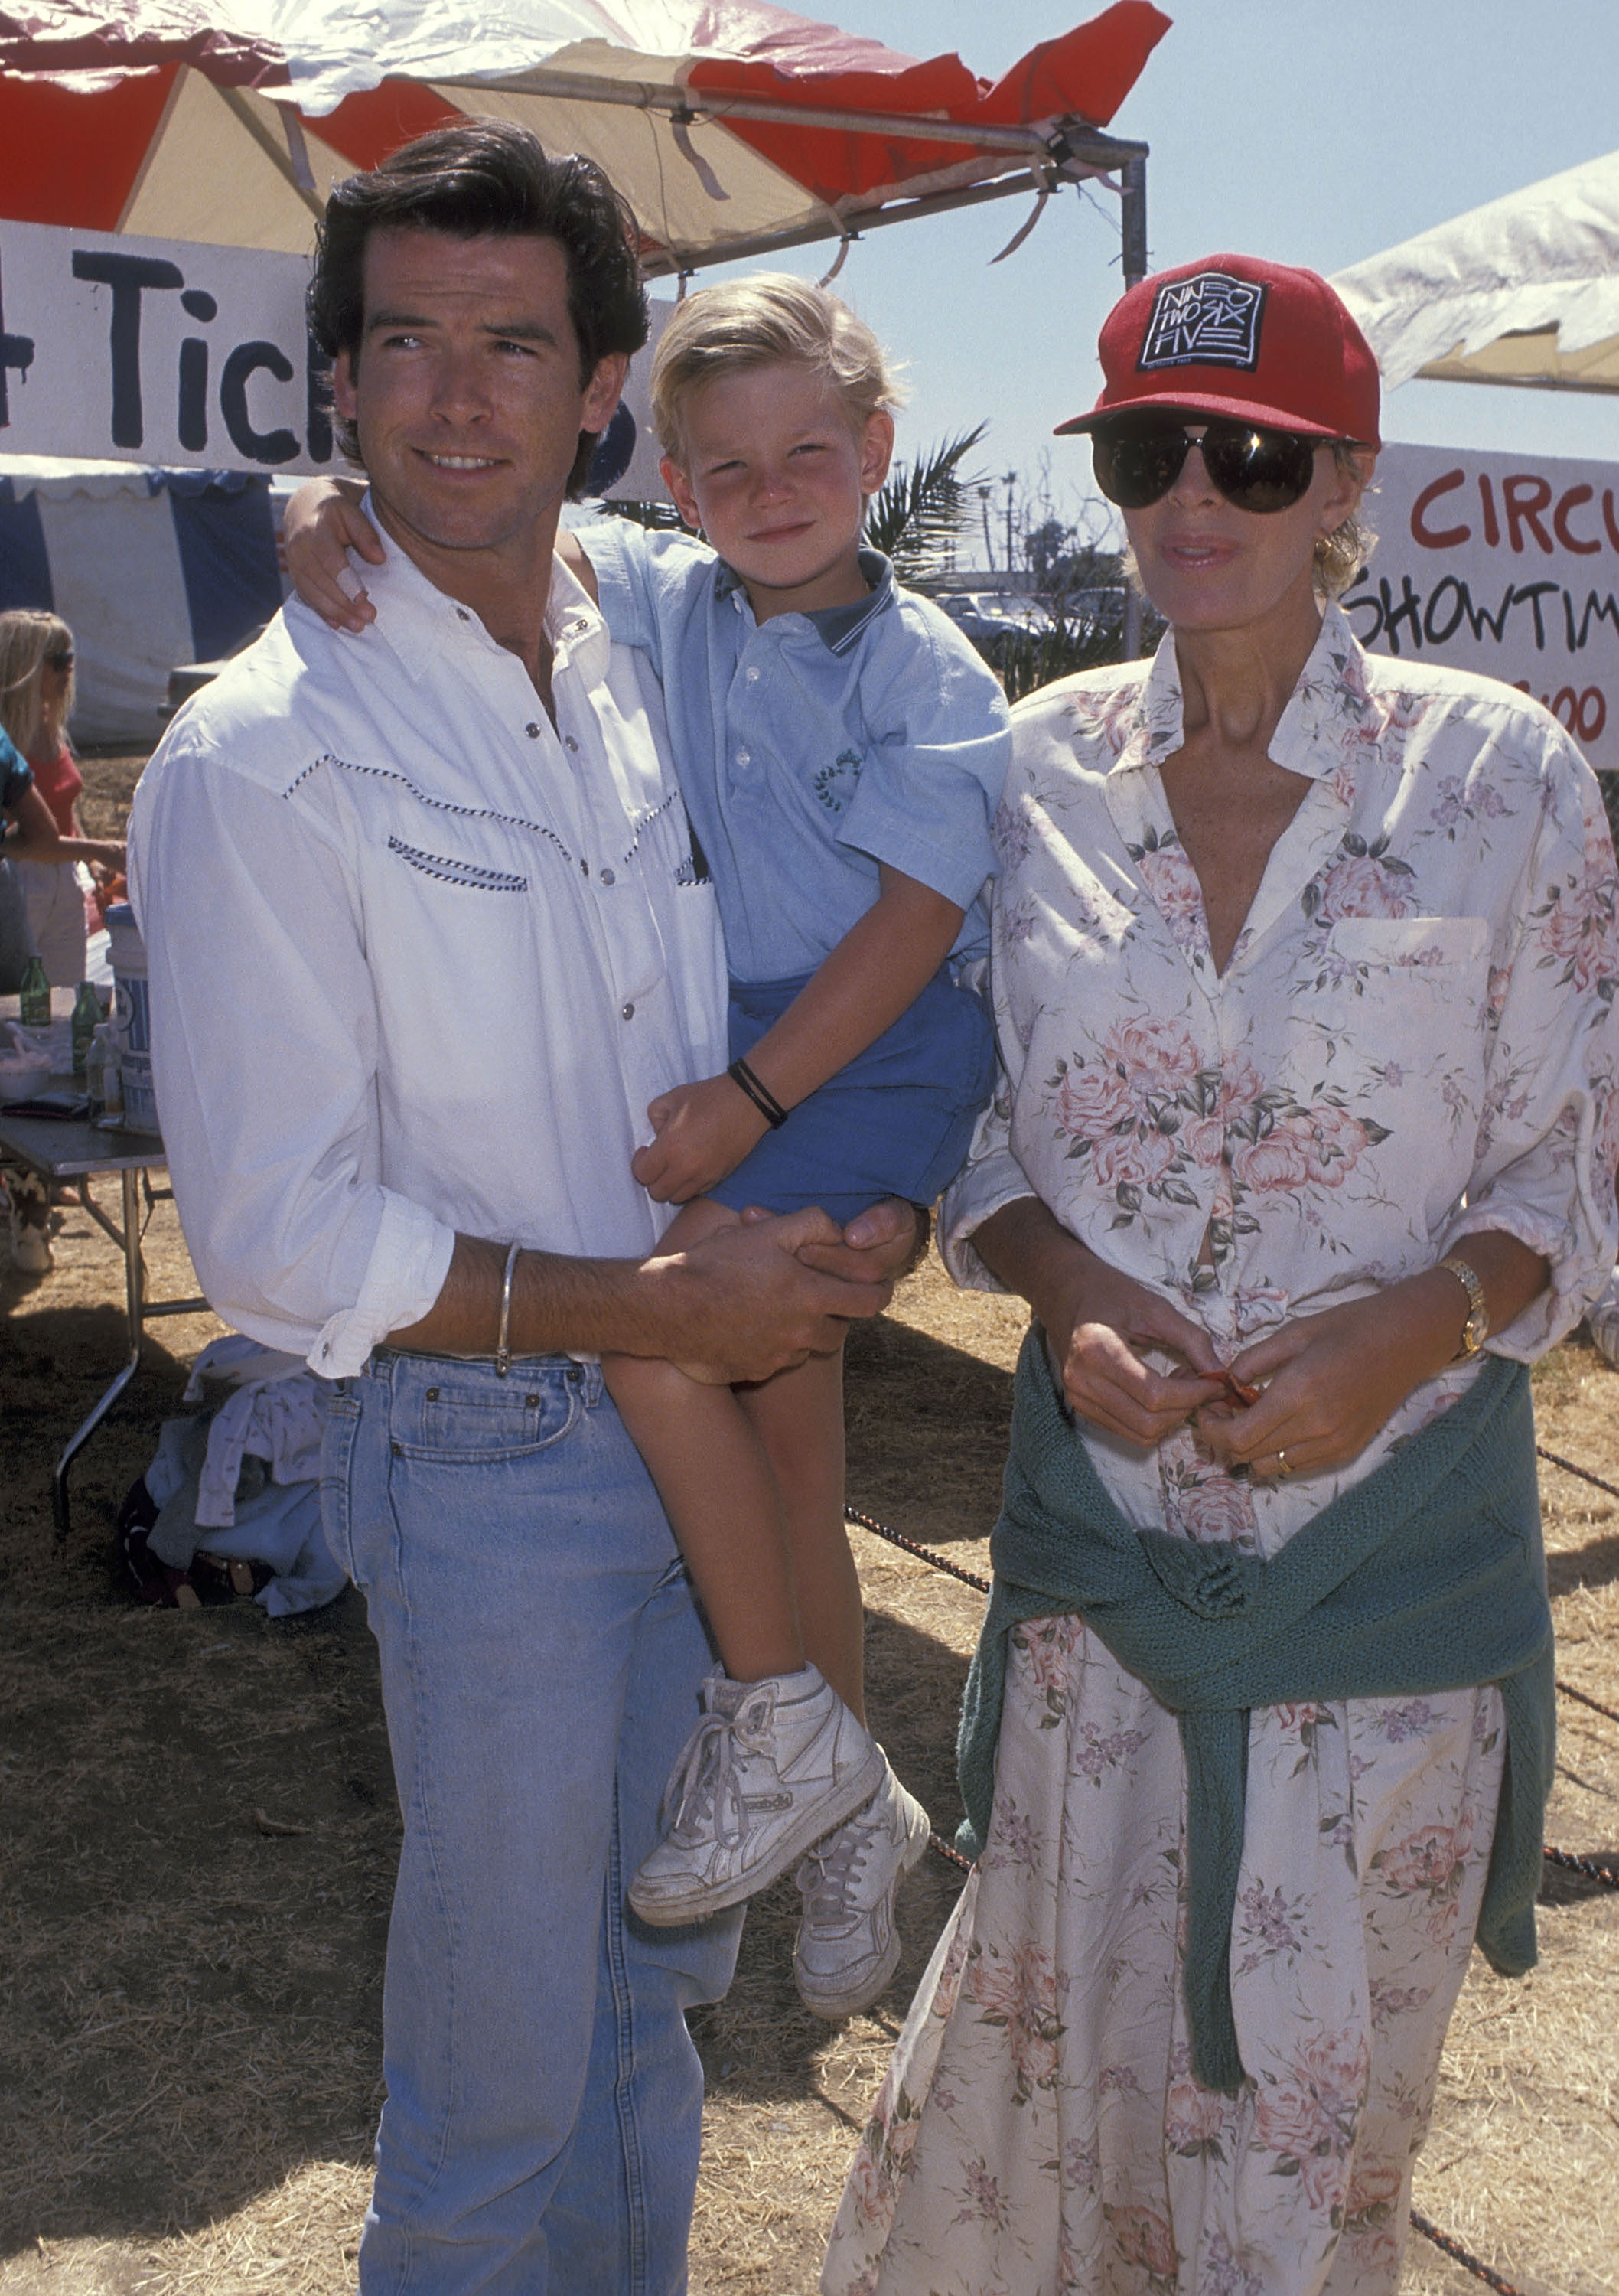 Pierce Brosnan, Sean Brosnan, and Cassandra Harris at the Eighth Annual Malibu Kiwanis Chili Cook-off Carnival and Fair in Malibu, 1989. | Source: Getty Images